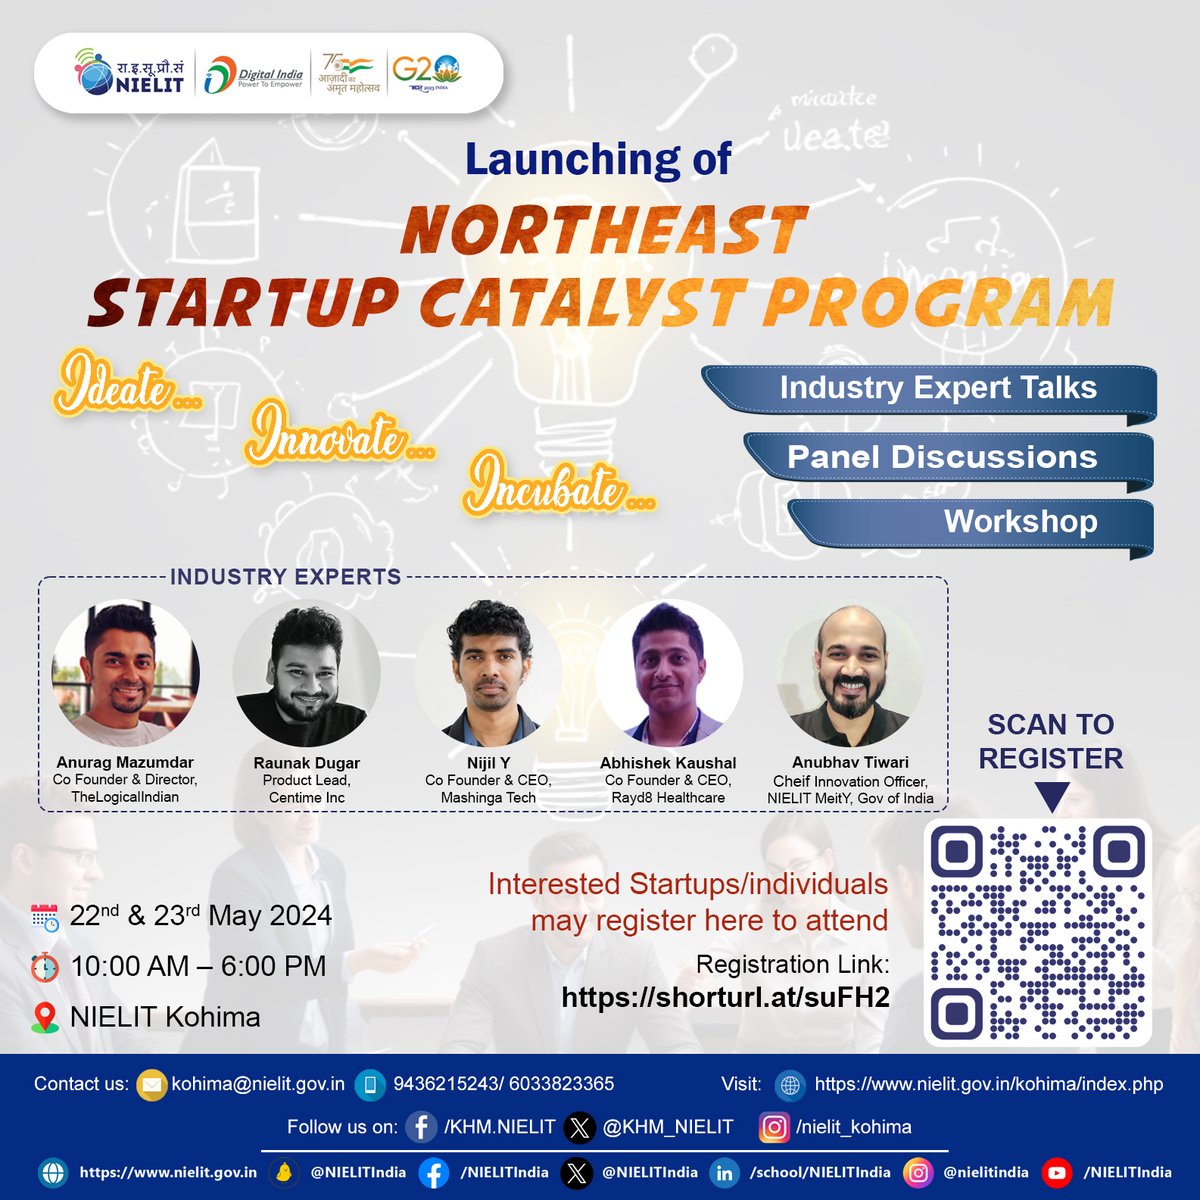 Join us for the Northeast Startup Catalyst Program! Register now to attend the launch event on May 22nd and 23rd 2024 at NIELIT Kohima. Don't miss this opportunity to ignite your startup journey! @NIELITIndia @GoI_MeitY @startupnagaland @dipr_nagaland